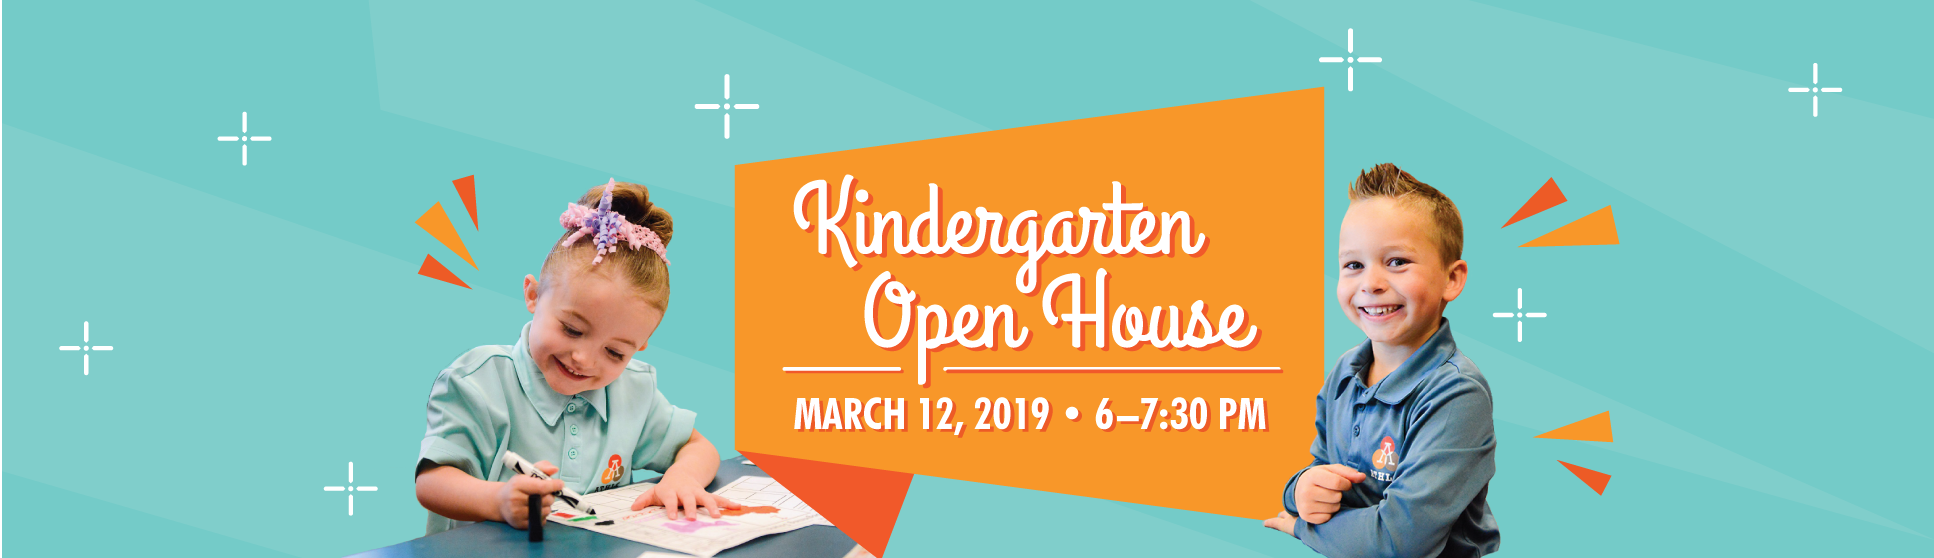 Kindergarten Open House on March 12, 2019 at 6:pm